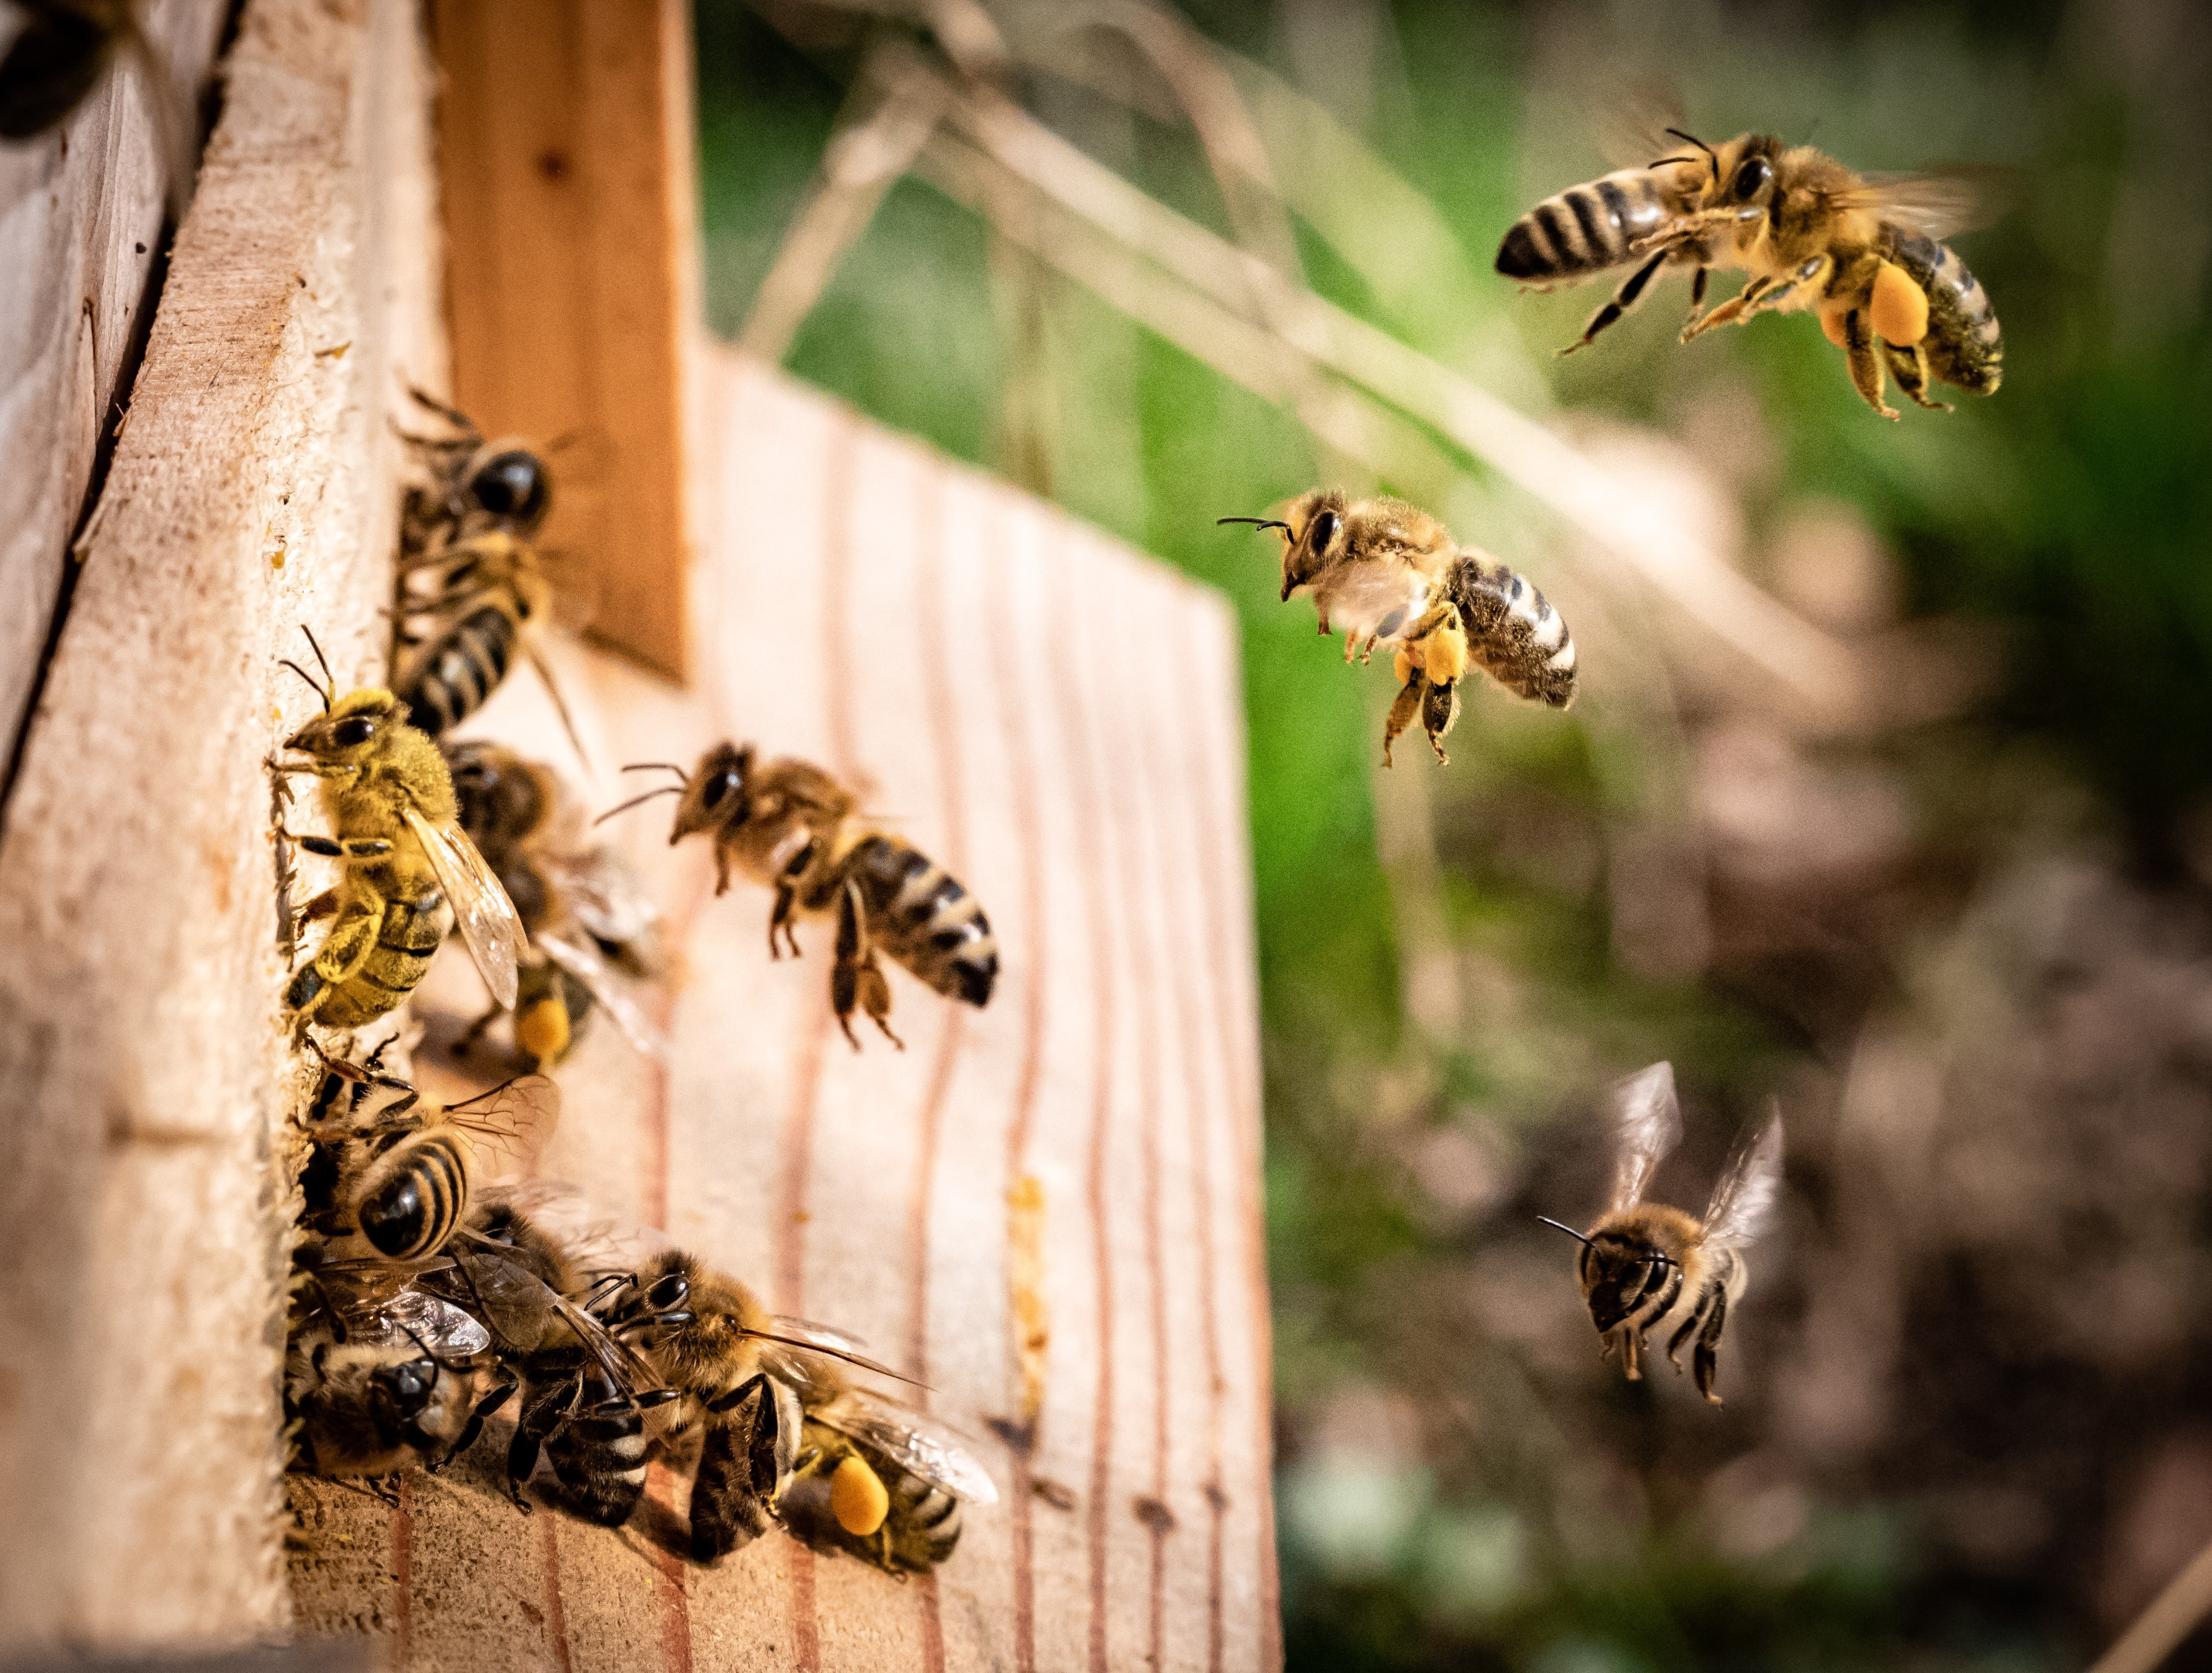 Honeybees festoon to communicate, among other functions of this behavior